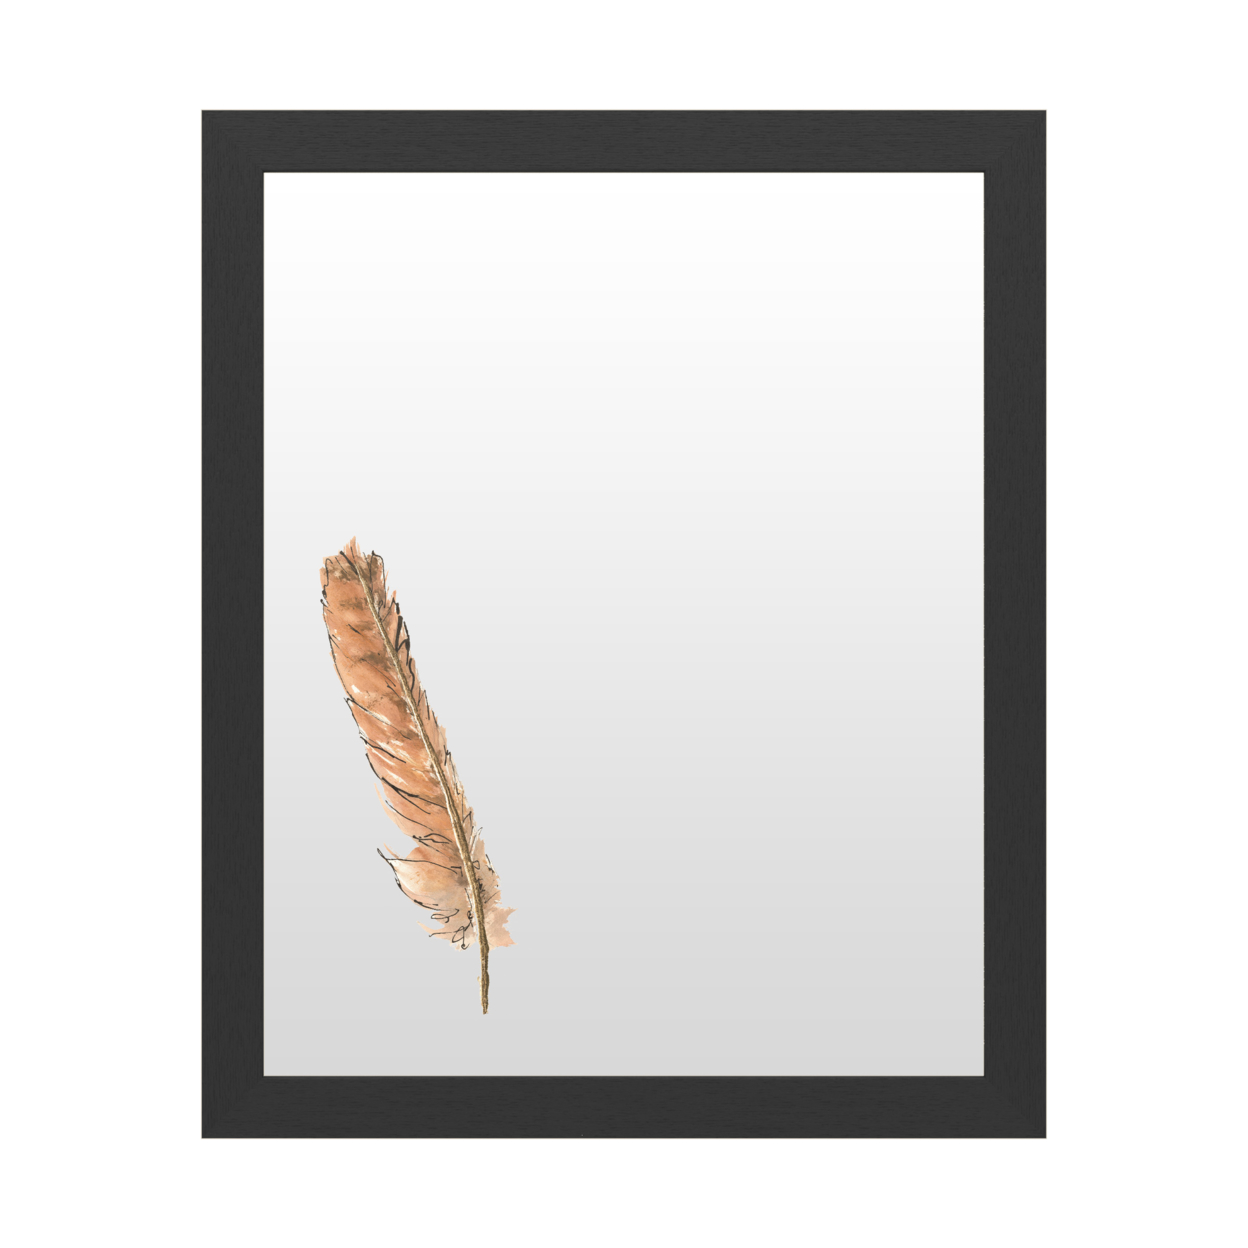 Dry Erase 16 X 20 Marker Board With Printed Artwork - Chris Paschke Gold Feathers Ii White Board - Ready To Hang